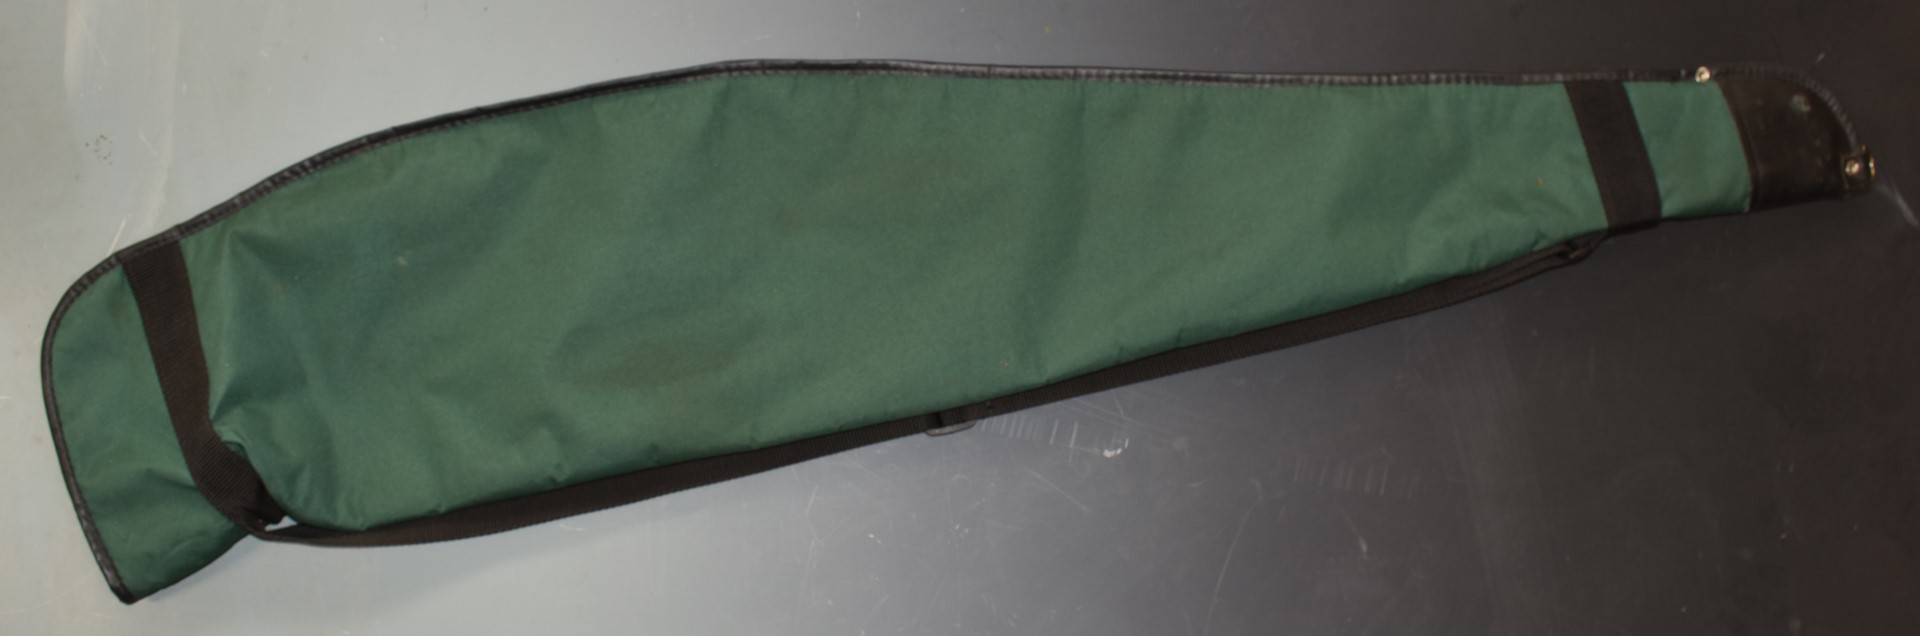 Five padded shotgun or rifle slips including Parker-Hale, Remington and Armex Force One. - Image 4 of 4